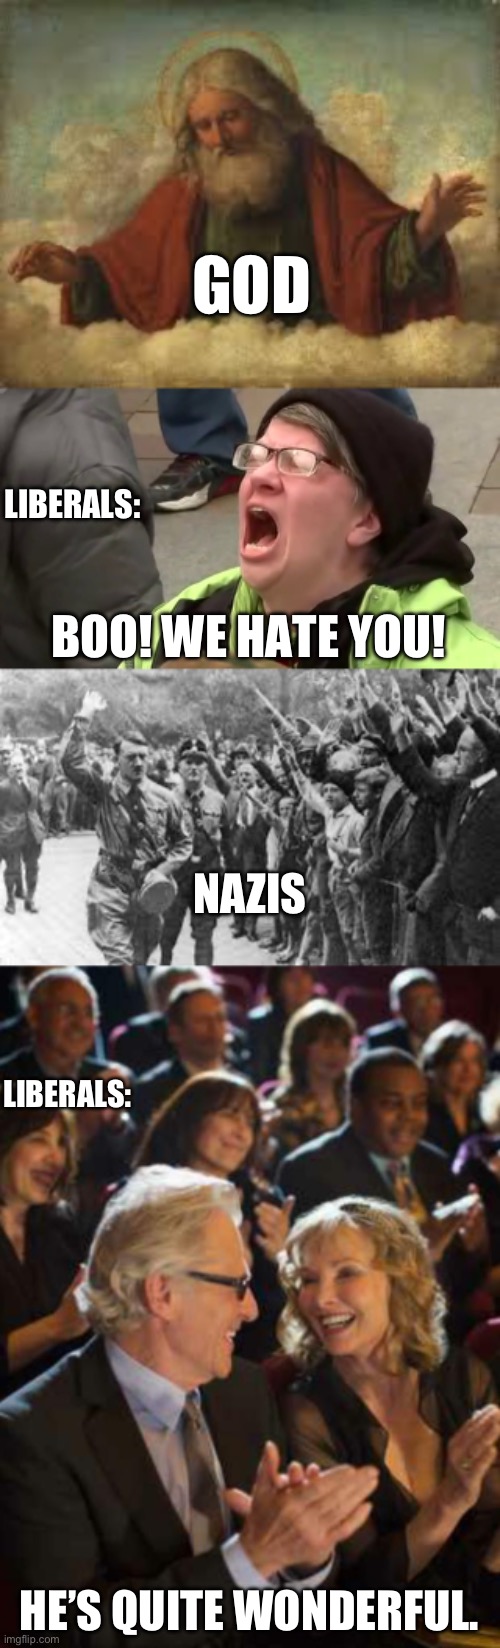 They hate God but applaud Nazis. Then they turn around and call us Nazis. | GOD; LIBERALS:; BOO! WE HATE YOU! NAZIS; LIBERALS:; HE’S QUITE WONDERFUL. | image tagged in god,screaming libtard,nazi germany approves,applause,politics,liberal hypocrisy | made w/ Imgflip meme maker